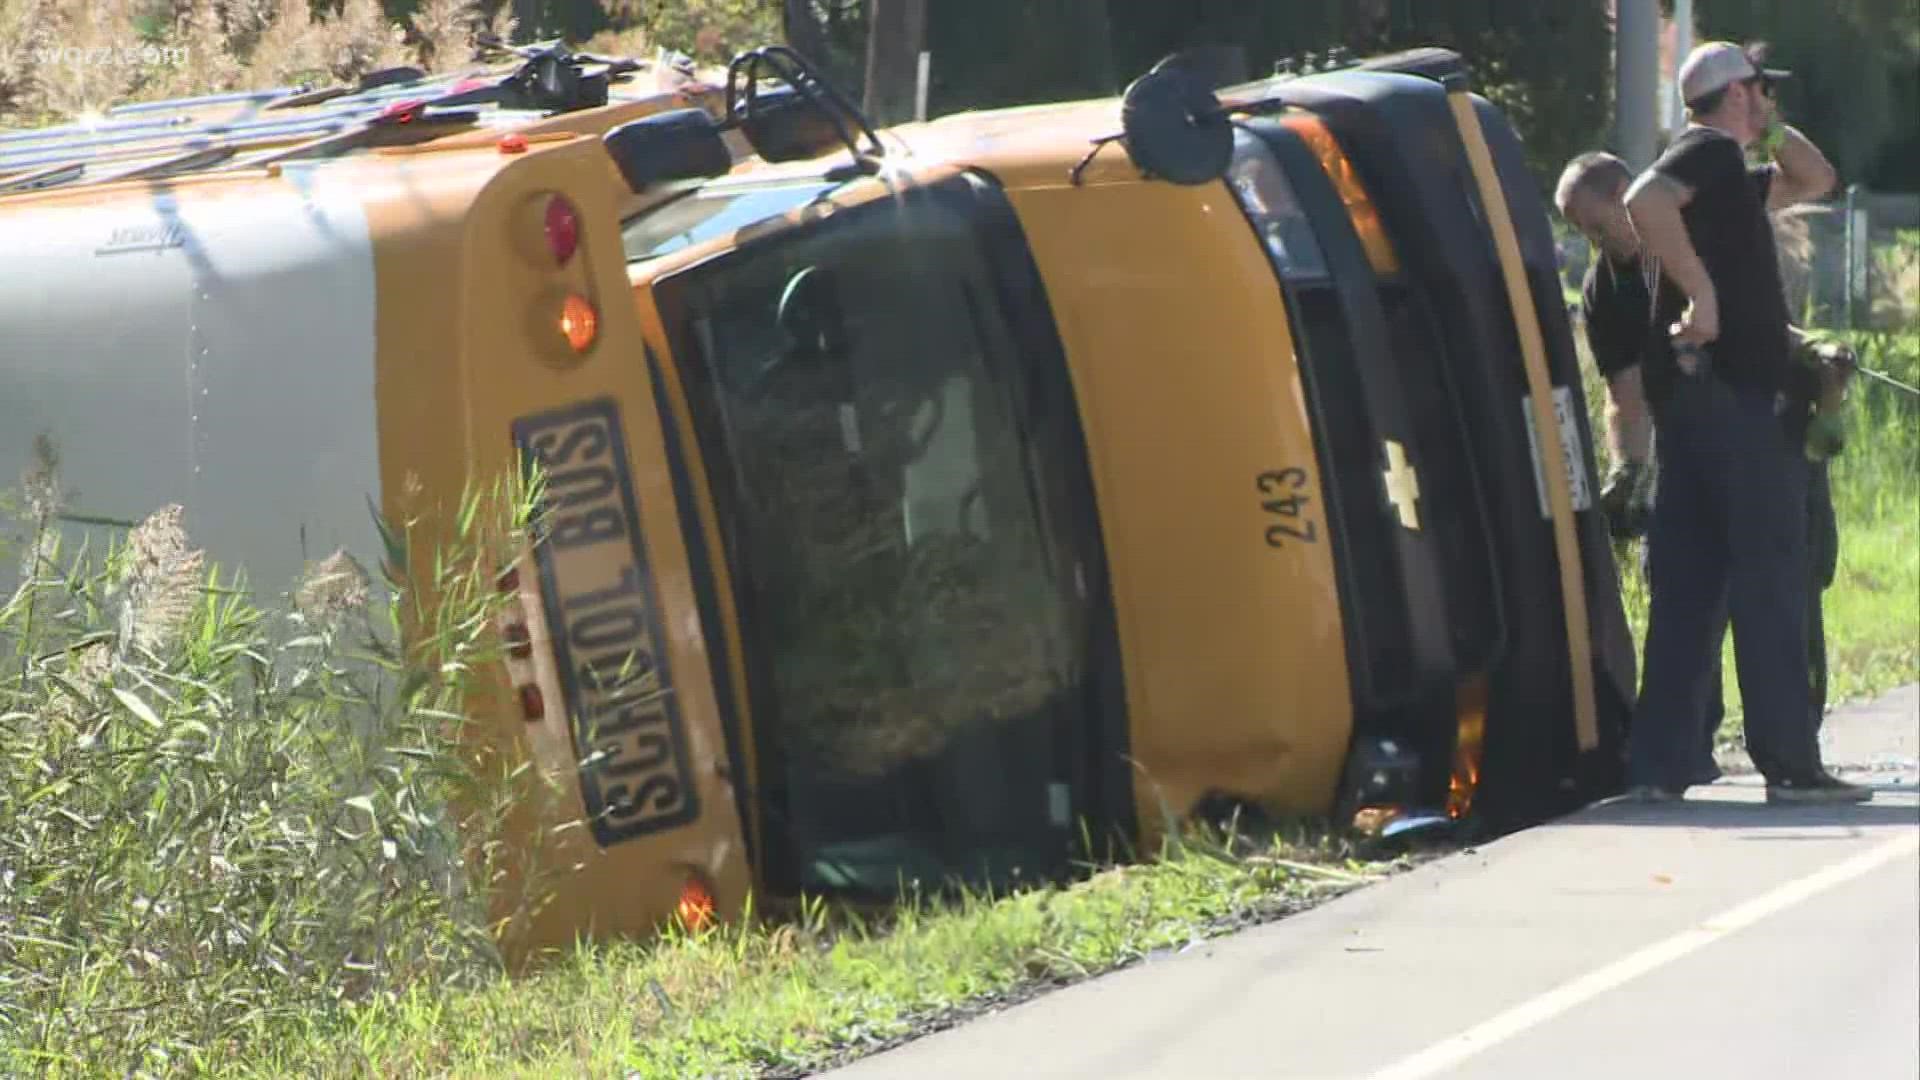 No children were on the bus at the time of the crash.